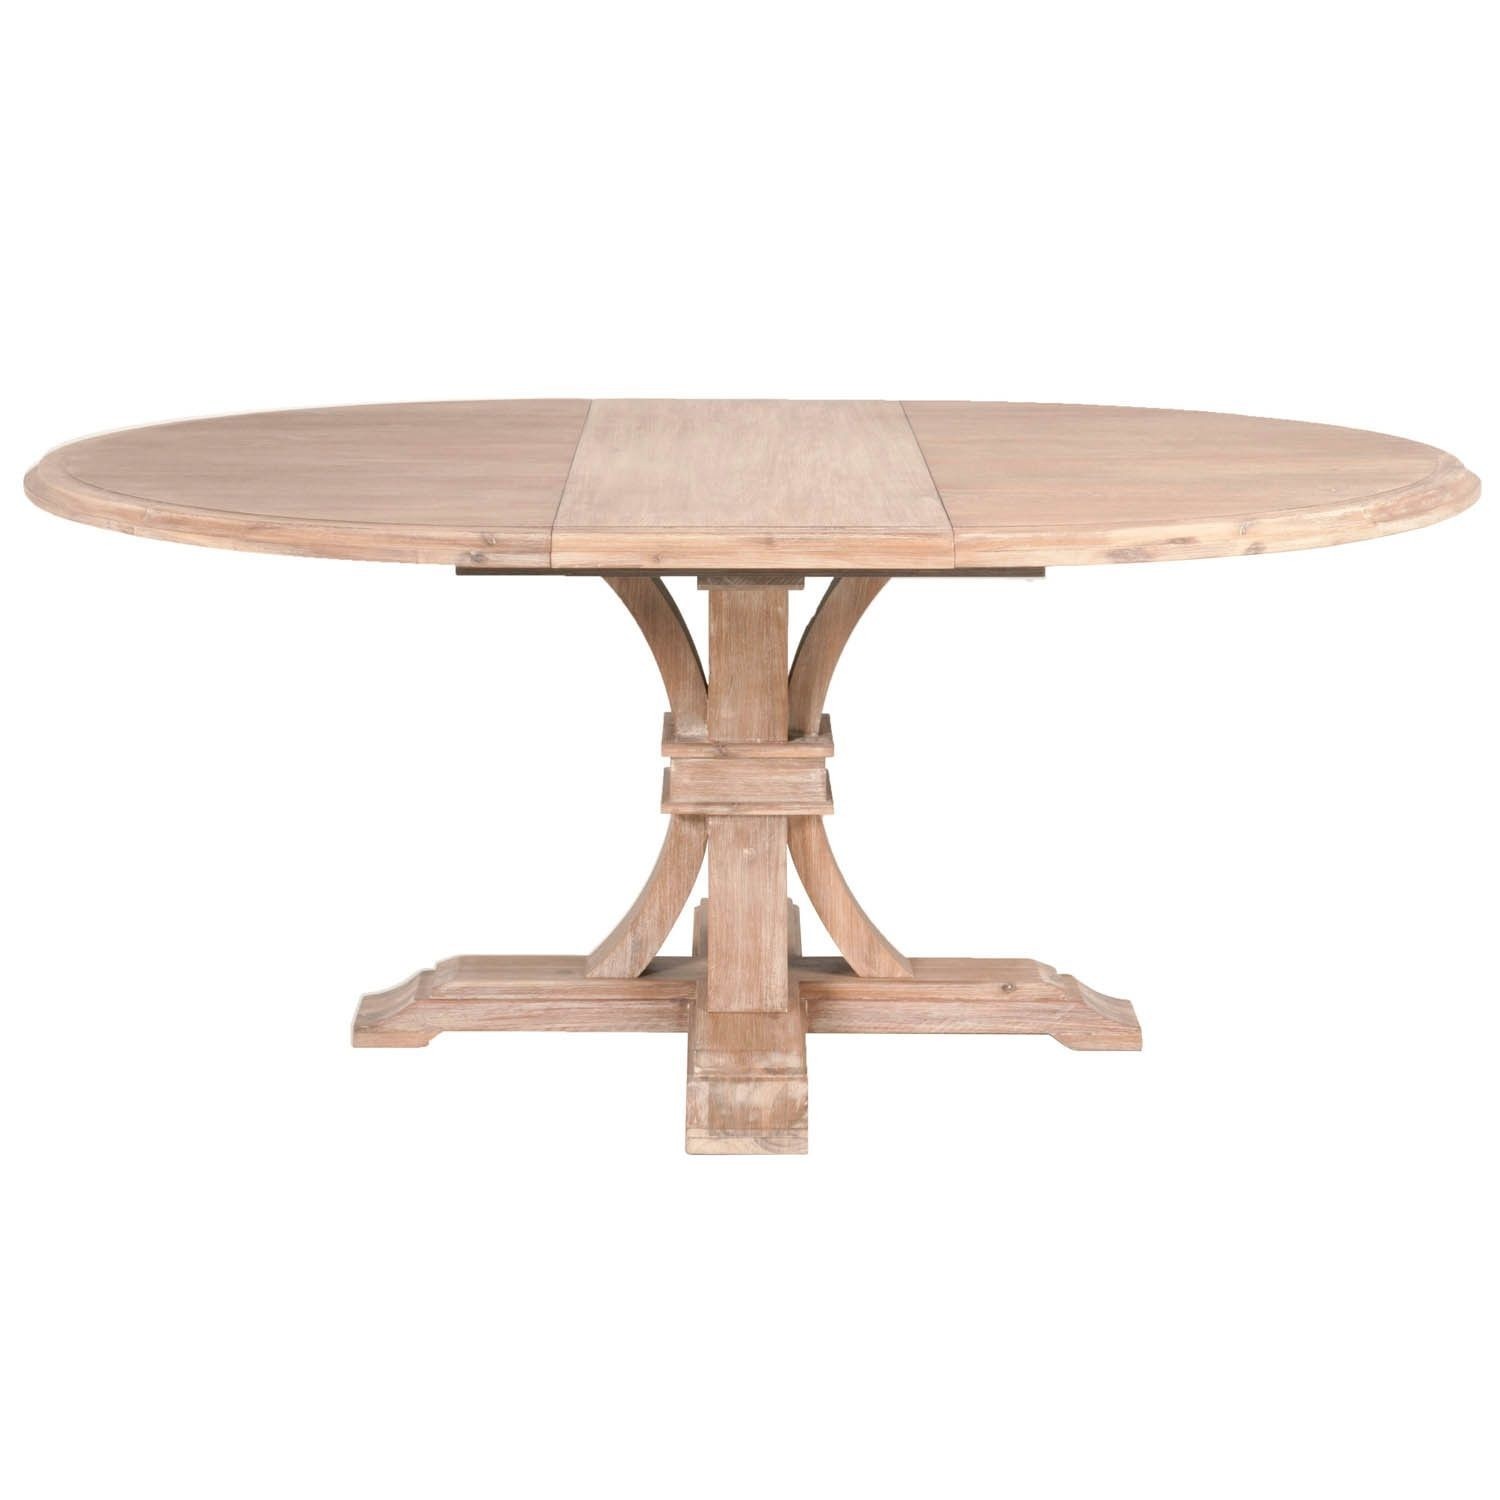 Devon round oval extension dining table stone wash